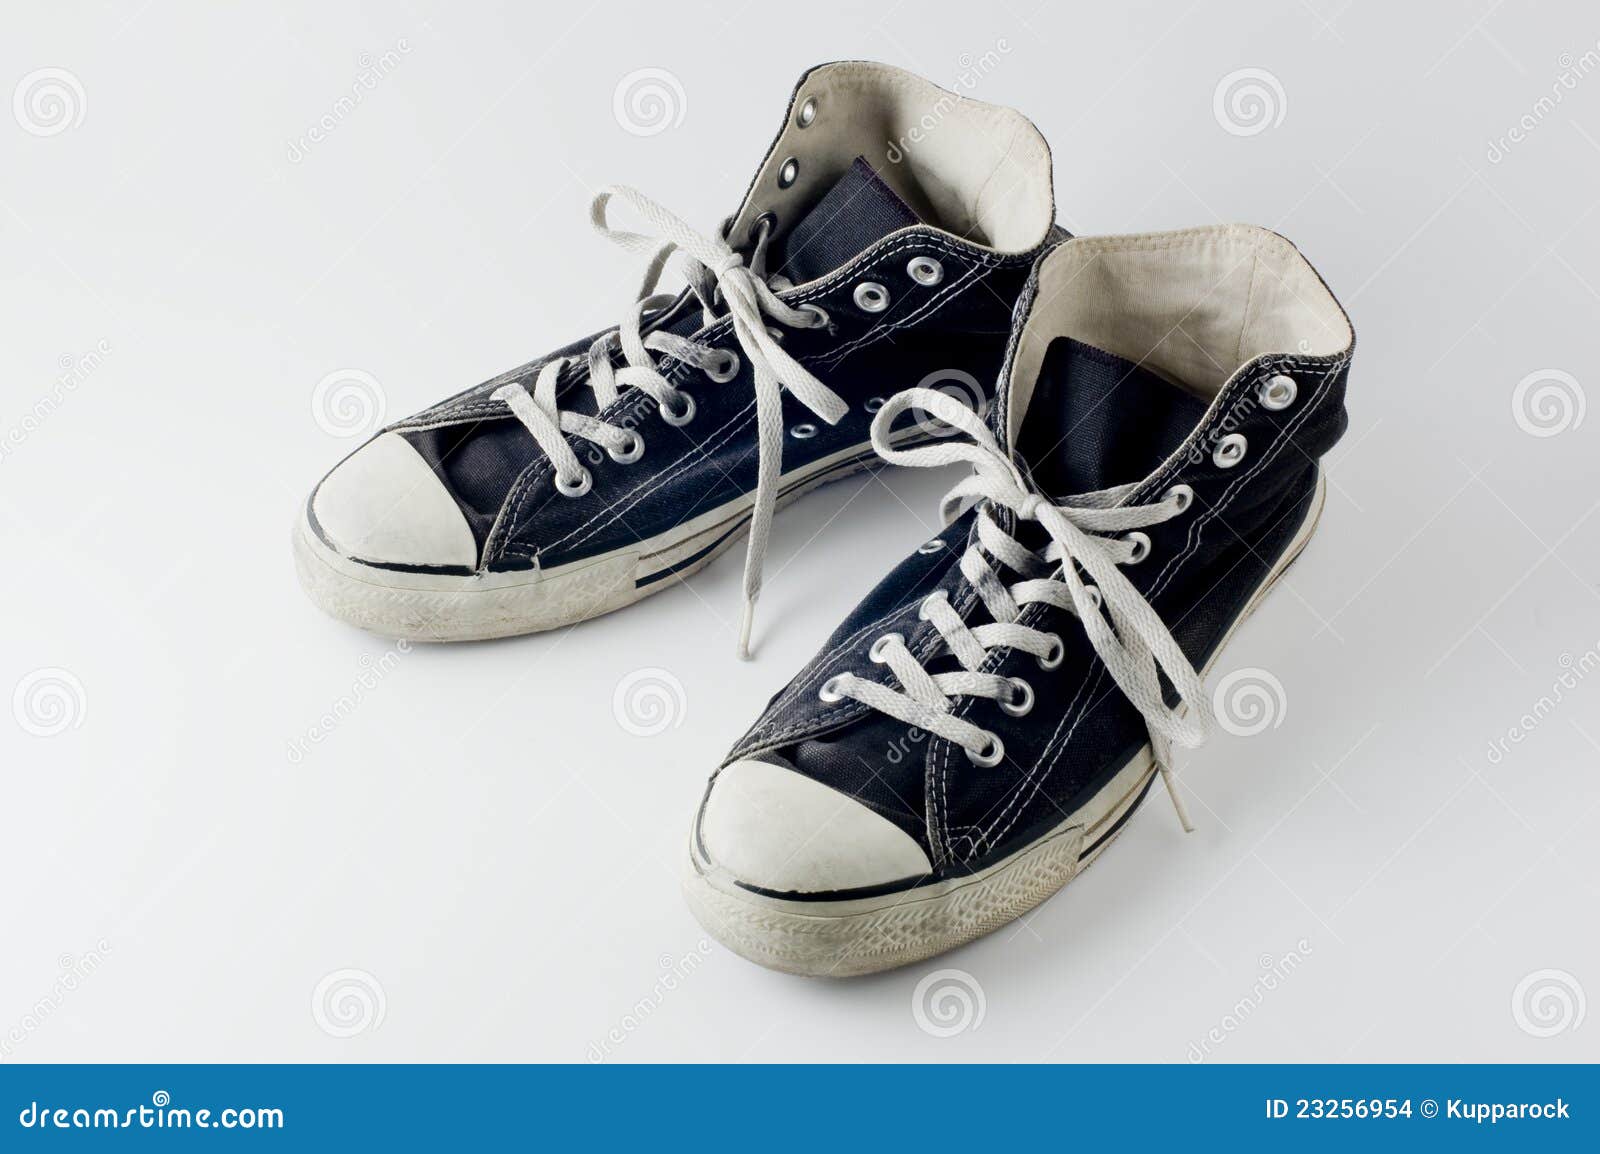 Black Color Vintage Sneakers Stock Photo - Image of fashioned, classic ...